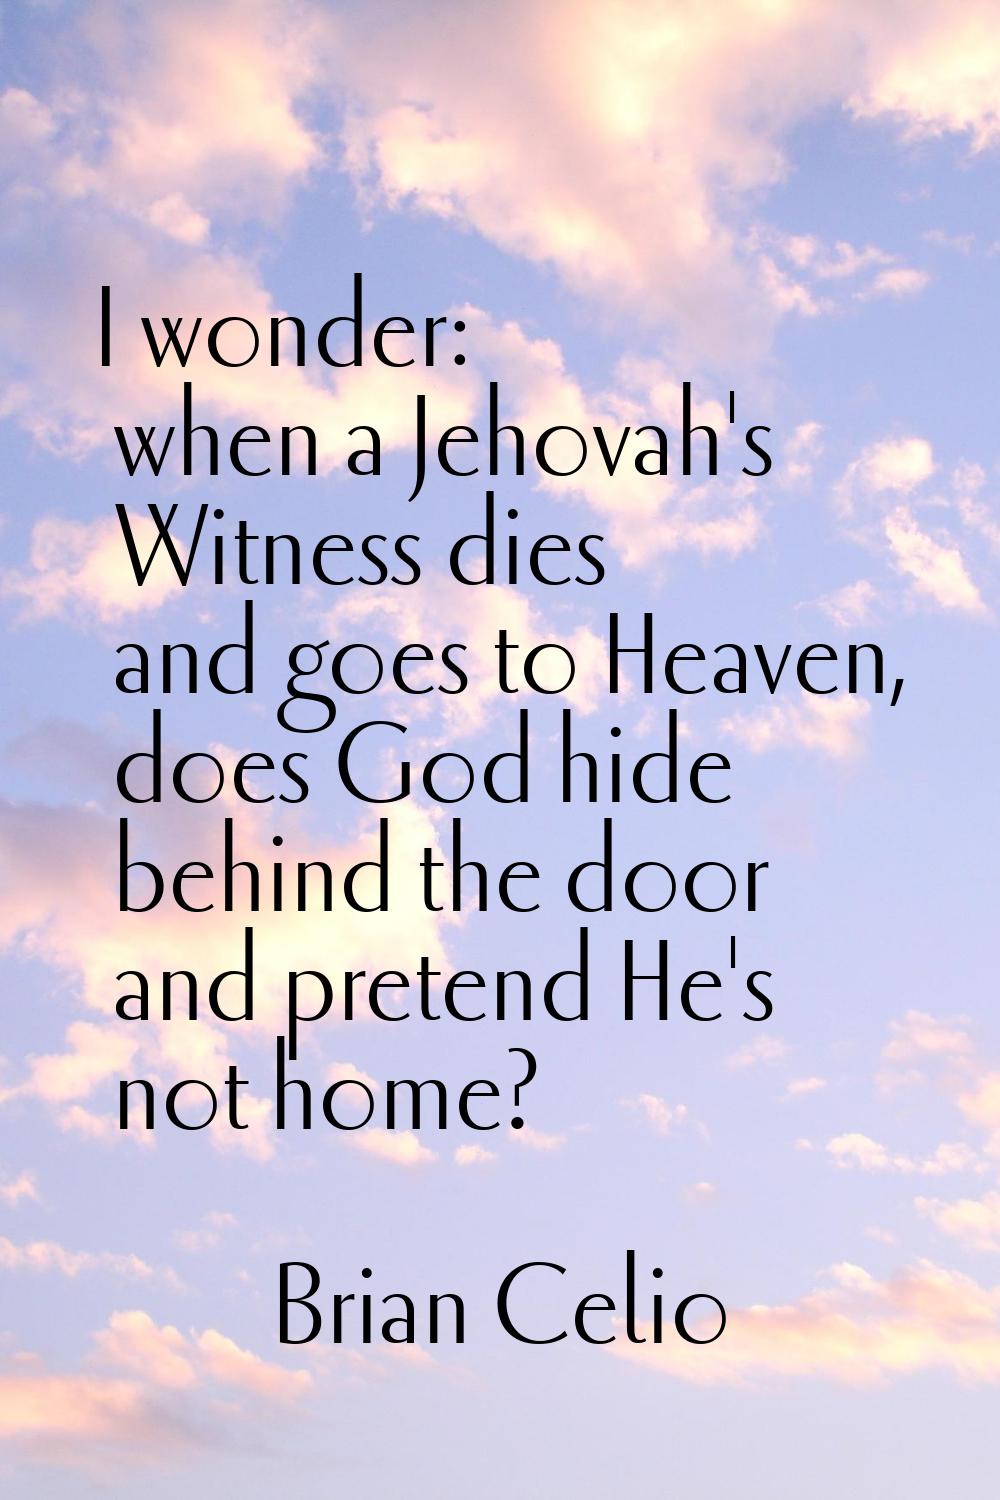 I wonder: when a Jehovah's Witness dies and goes to Heaven, does God hide behind the door and prete